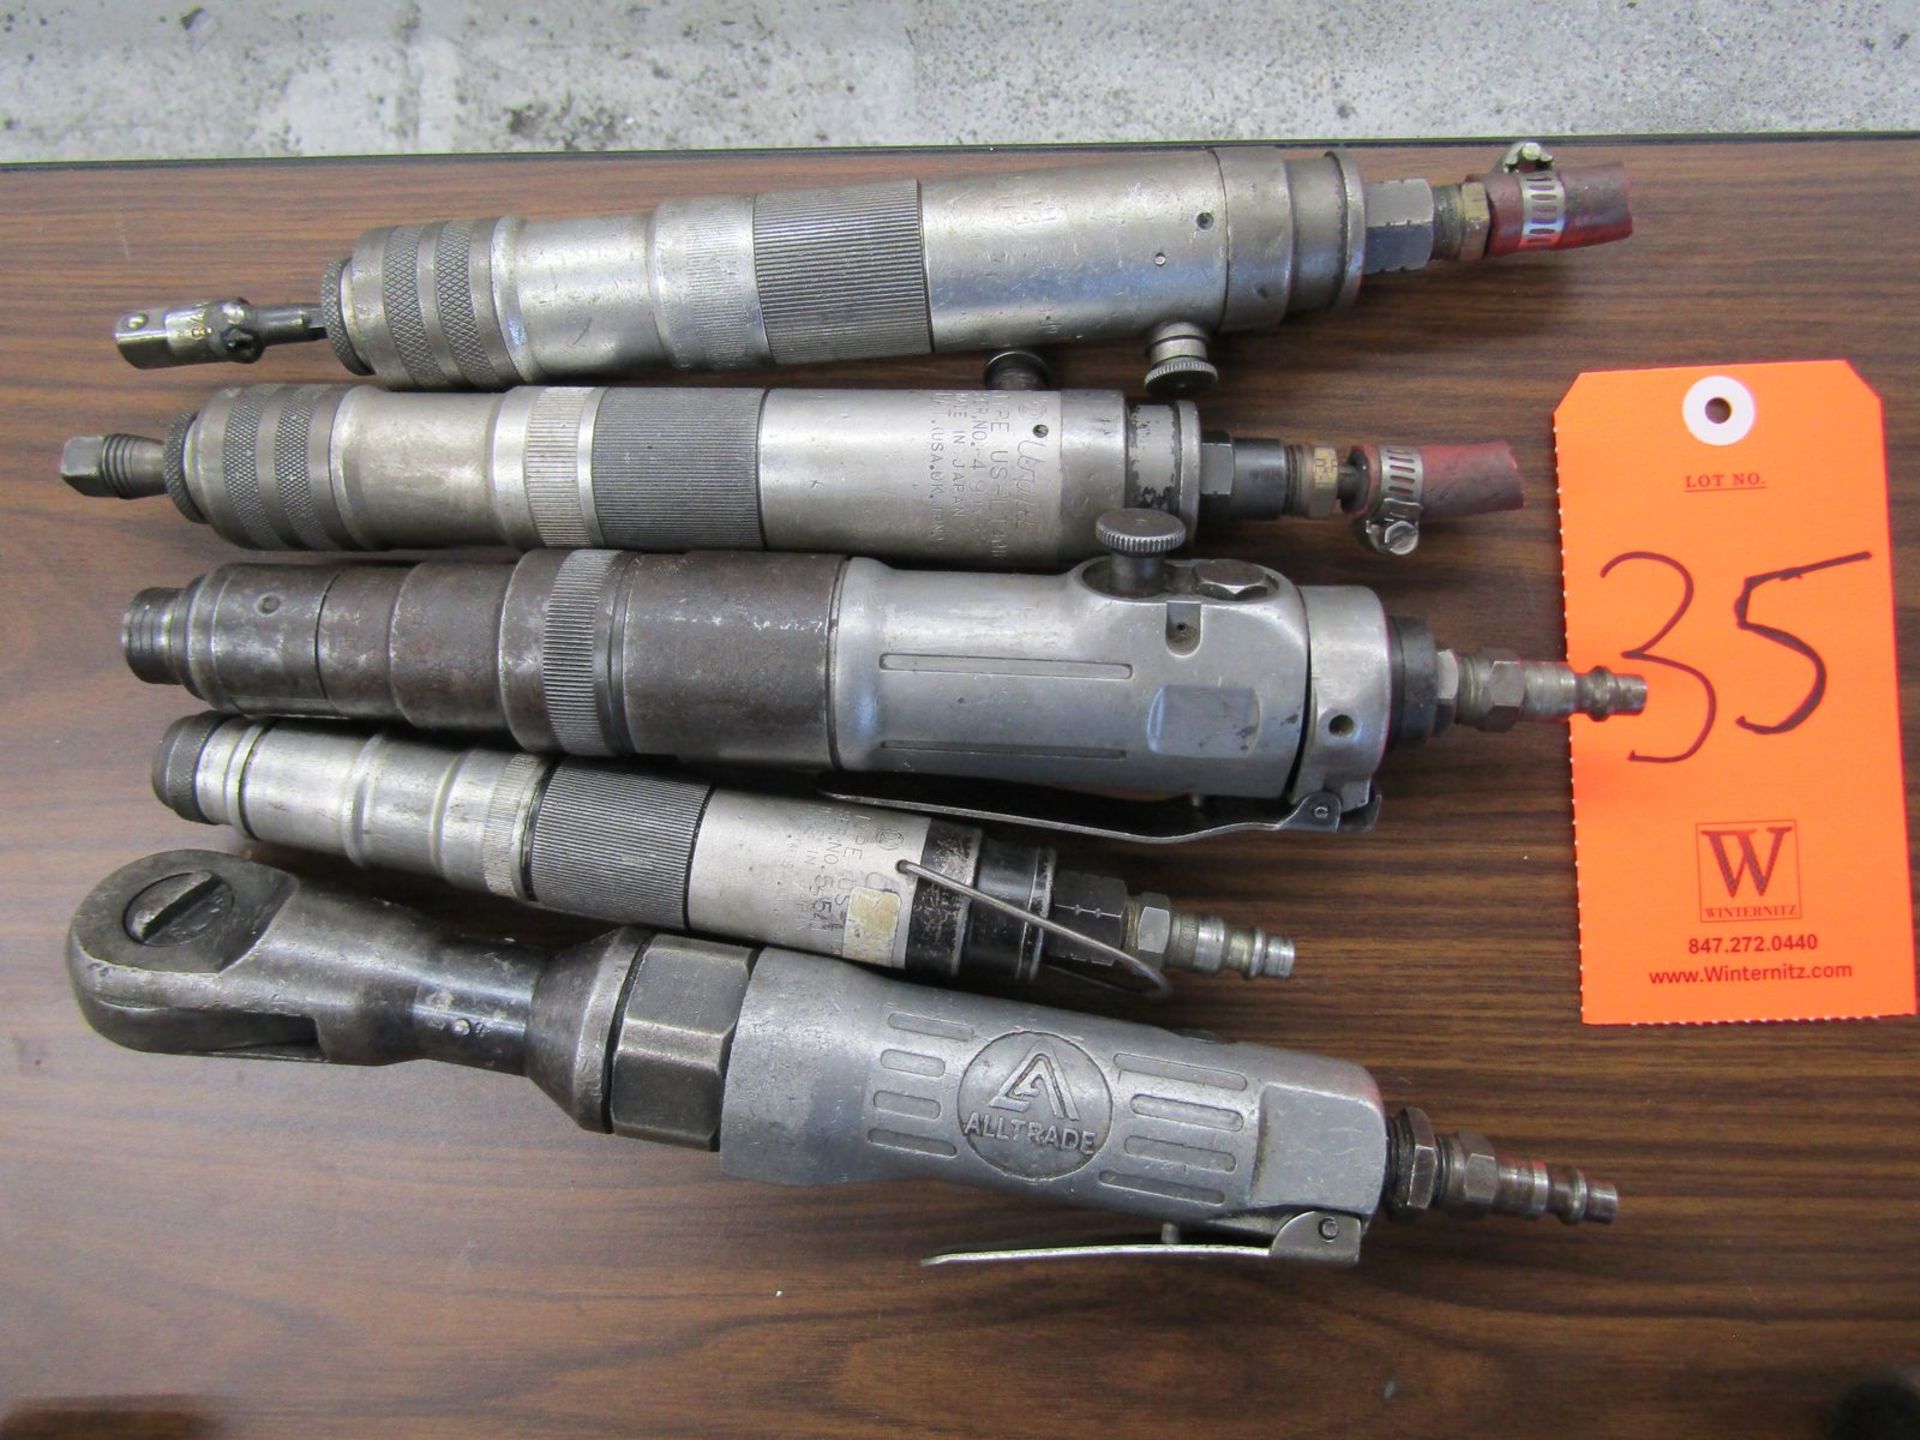 Lot - (5) Pneumatic Drivers, (1) Alltrade 3/8 in. Drive Angle Ratchet, (4) Aimco Uryu 1/4 in.